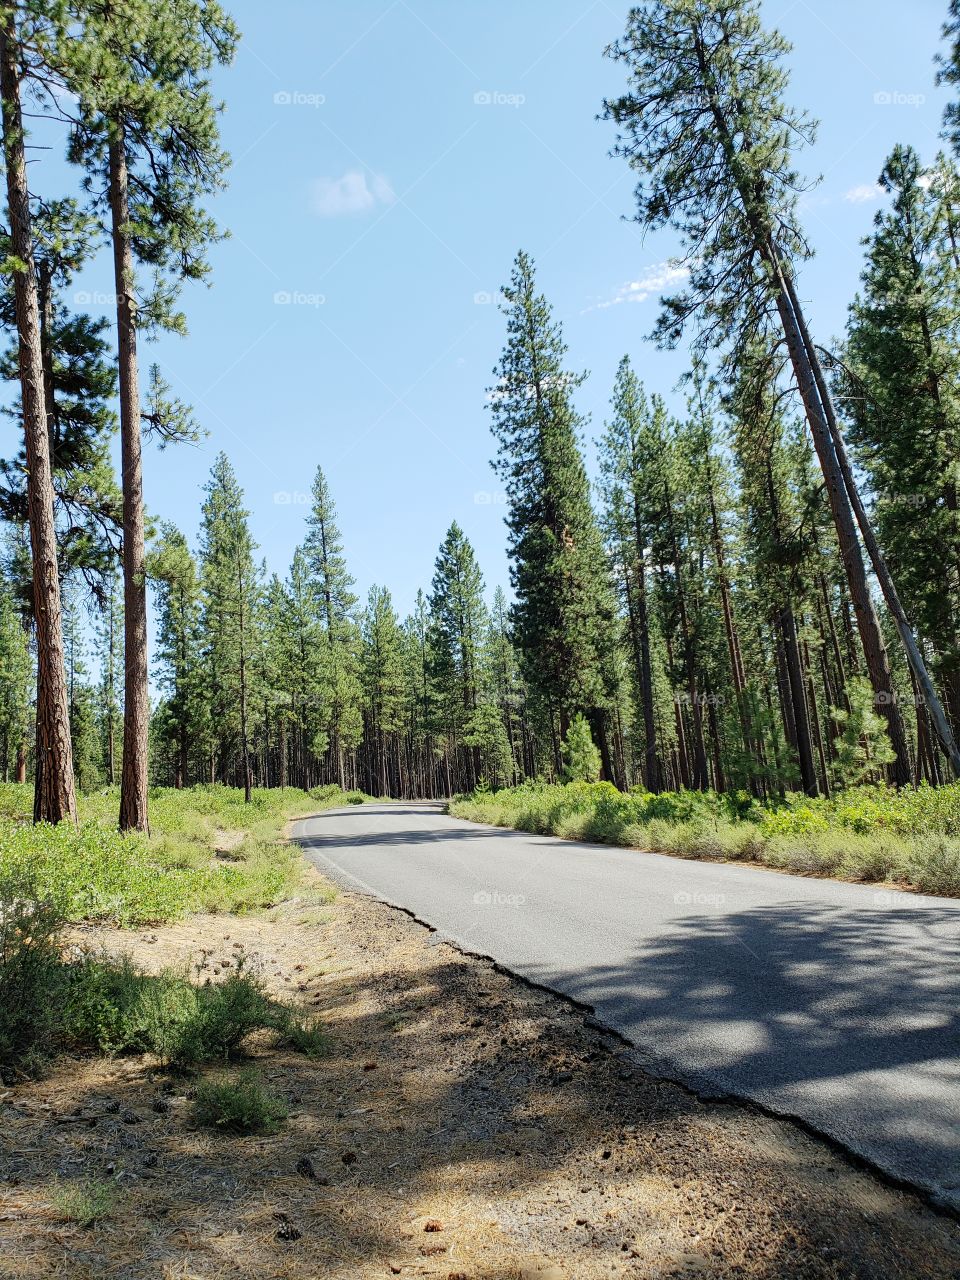 A backroad runs through Incredible towering ponderosa pine trees above green manzanita bushes in the Deschutes National Forest in Central Oregon on beautiful sunny summer day. 